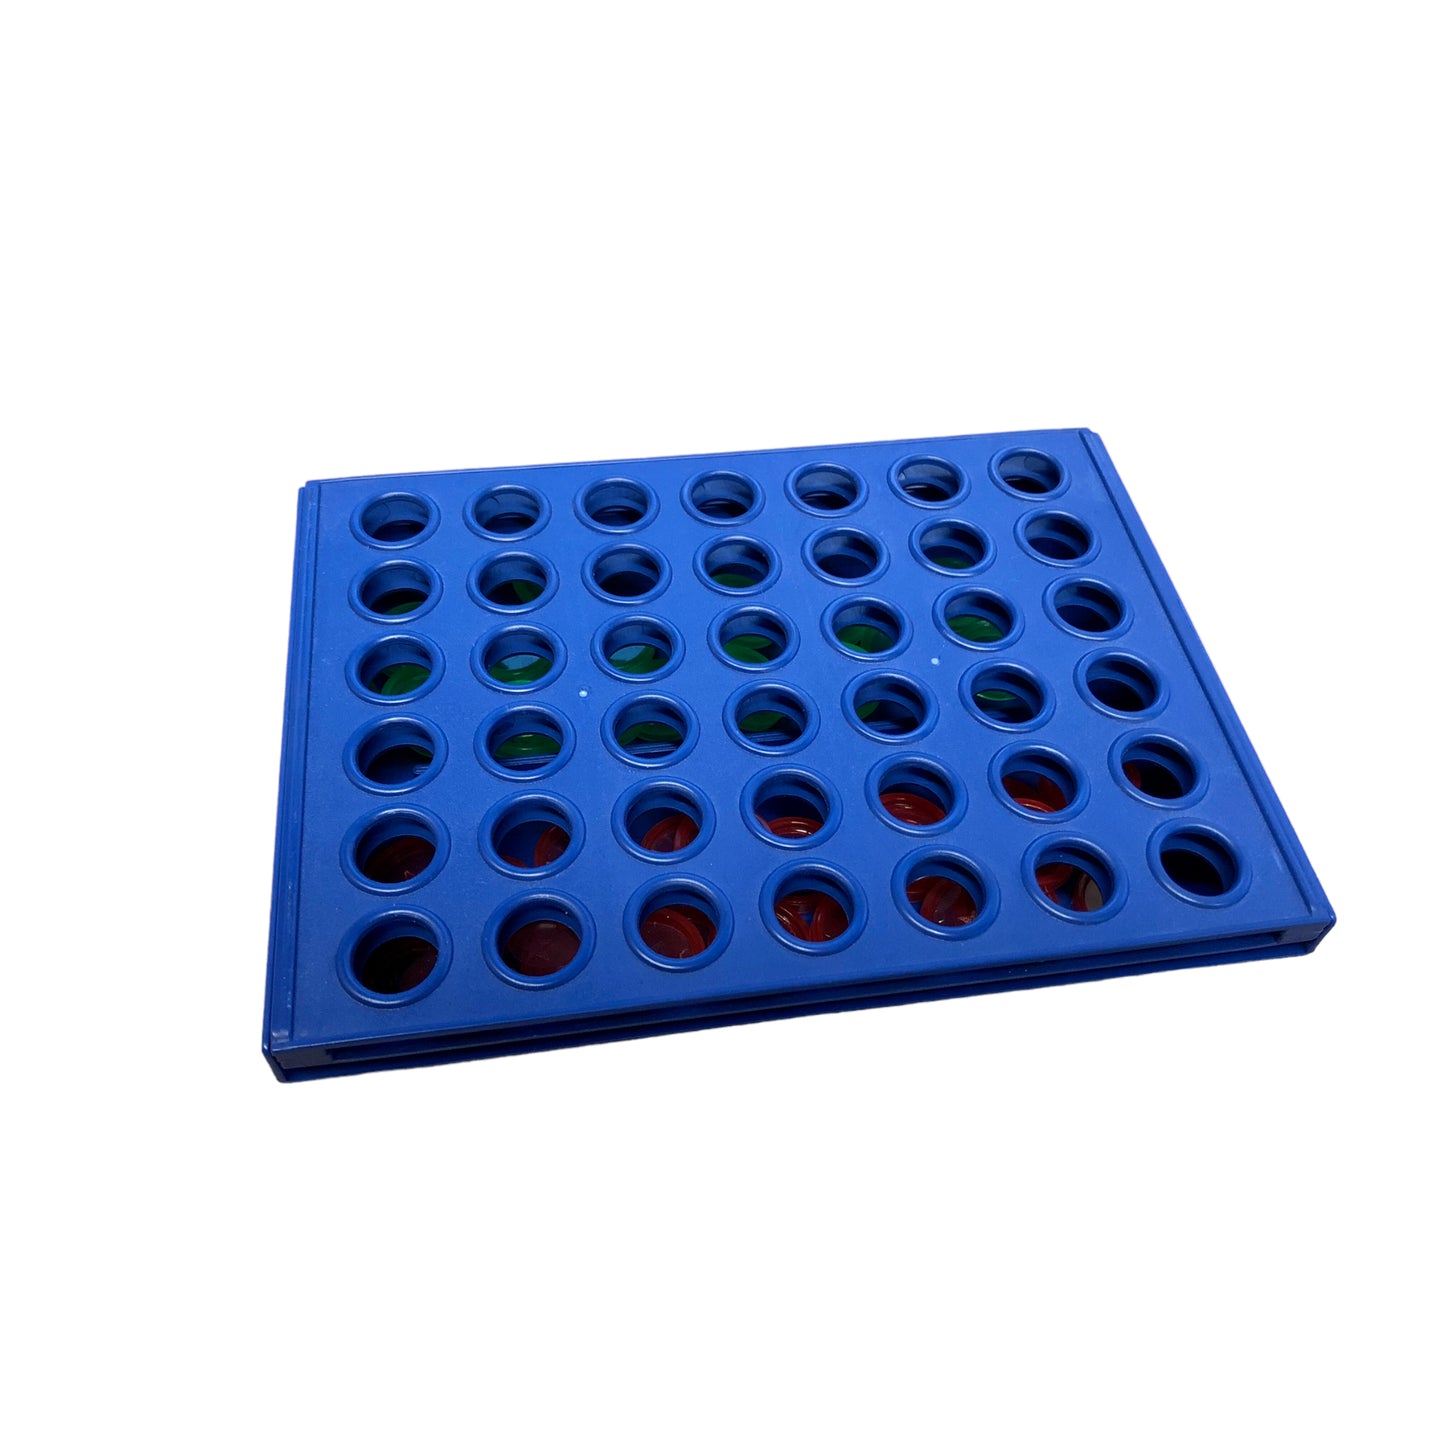 Connect 4 Game - Travel edition